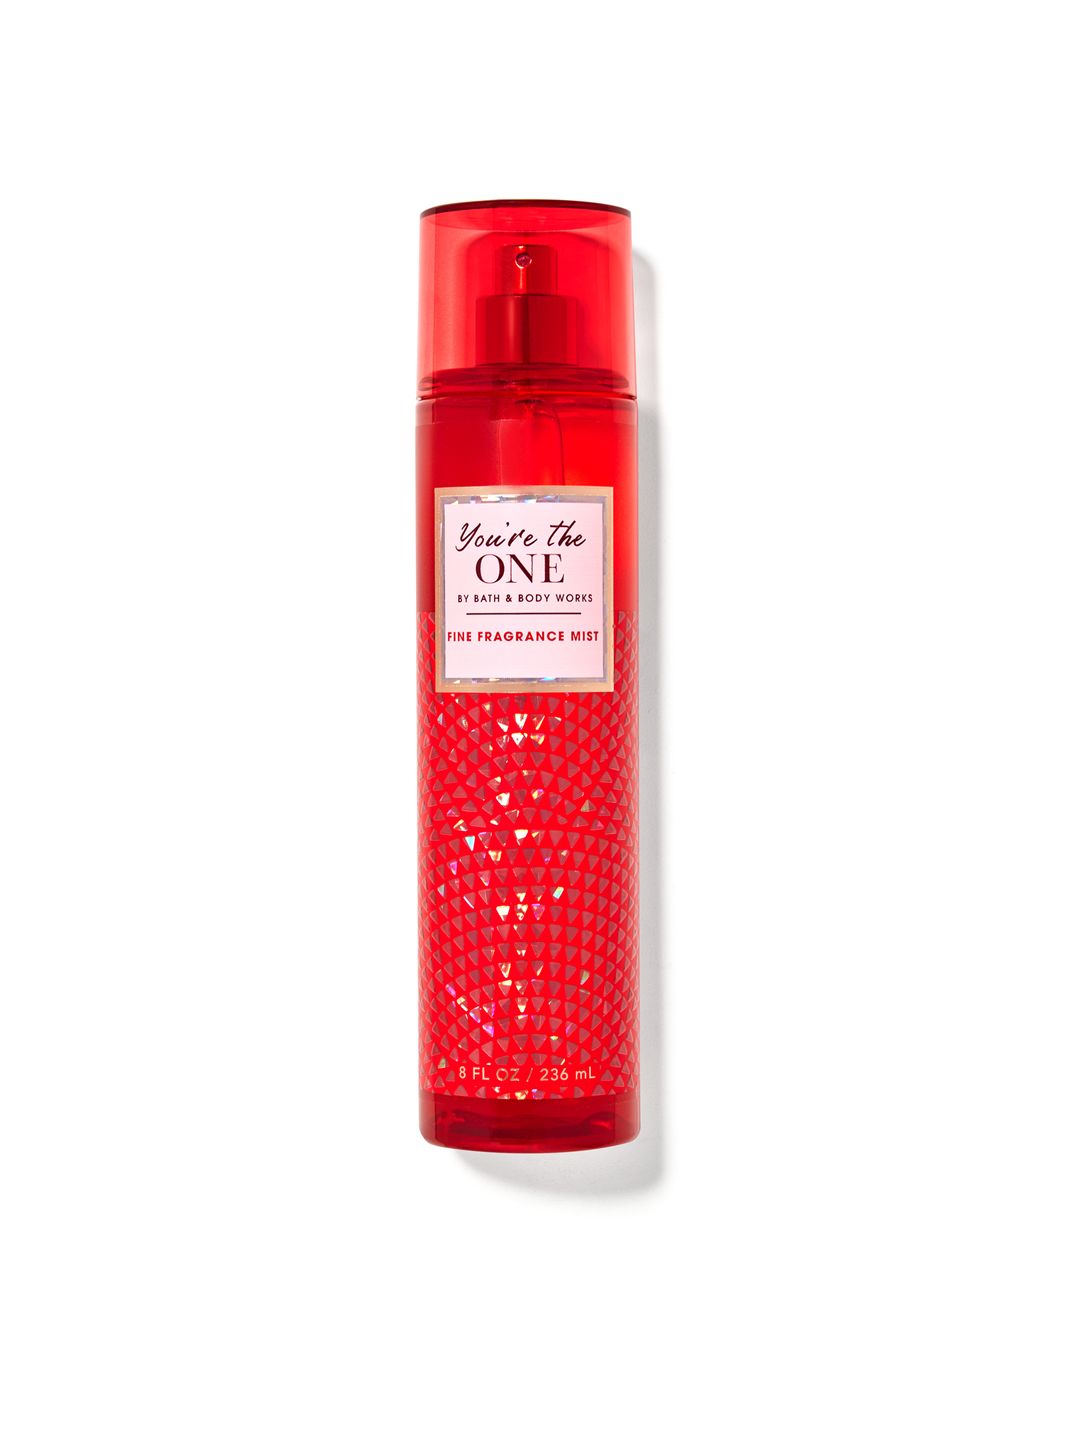 Bath & Body Works You're the One Fine Fragrance Mist 236 ml Price in India